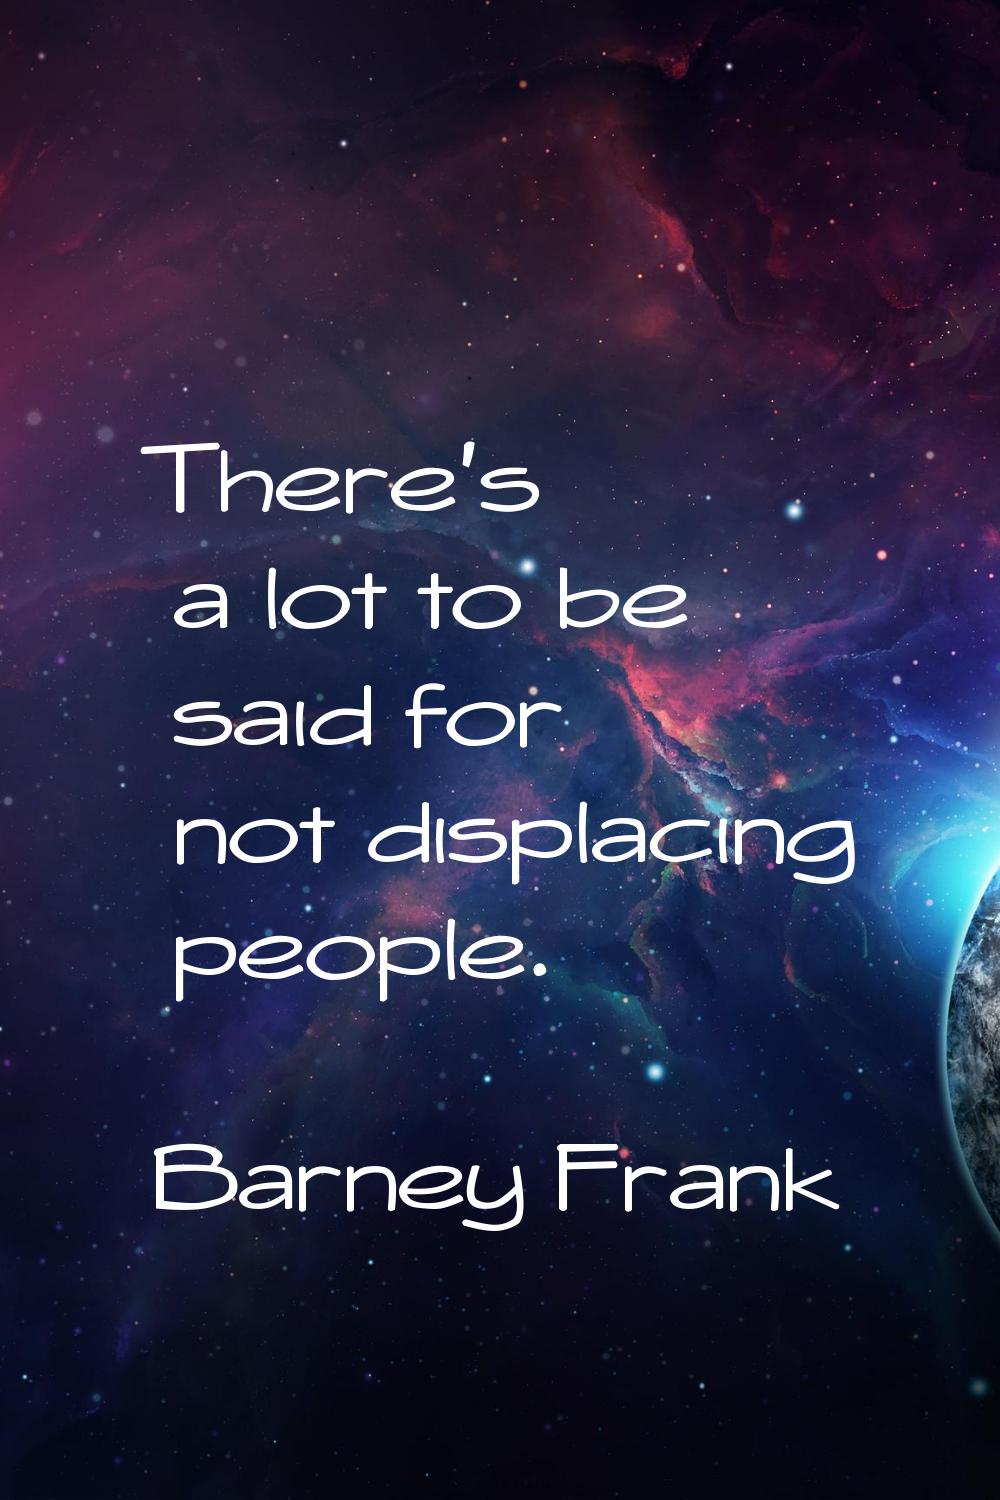 There's a lot to be said for not displacing people.